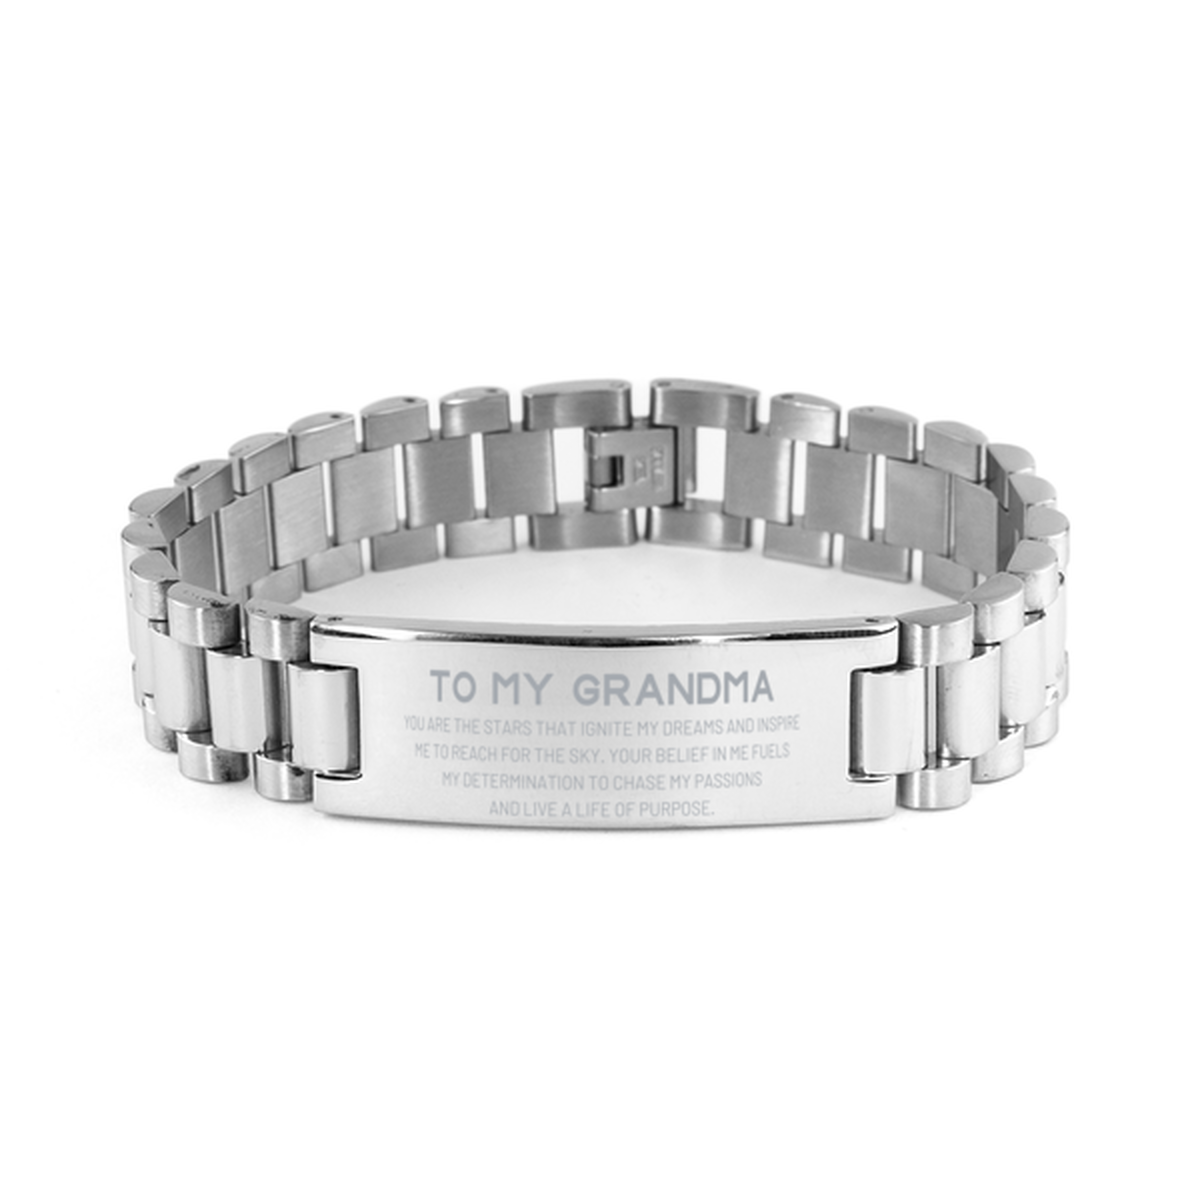 To My Grandma Ladder Stainless Steel Bracelet, You are the stars that ignite my dreams and inspire me to reach for the sky, Birthday Unique Gifts For Grandma, Thank You Gifts For Grandma